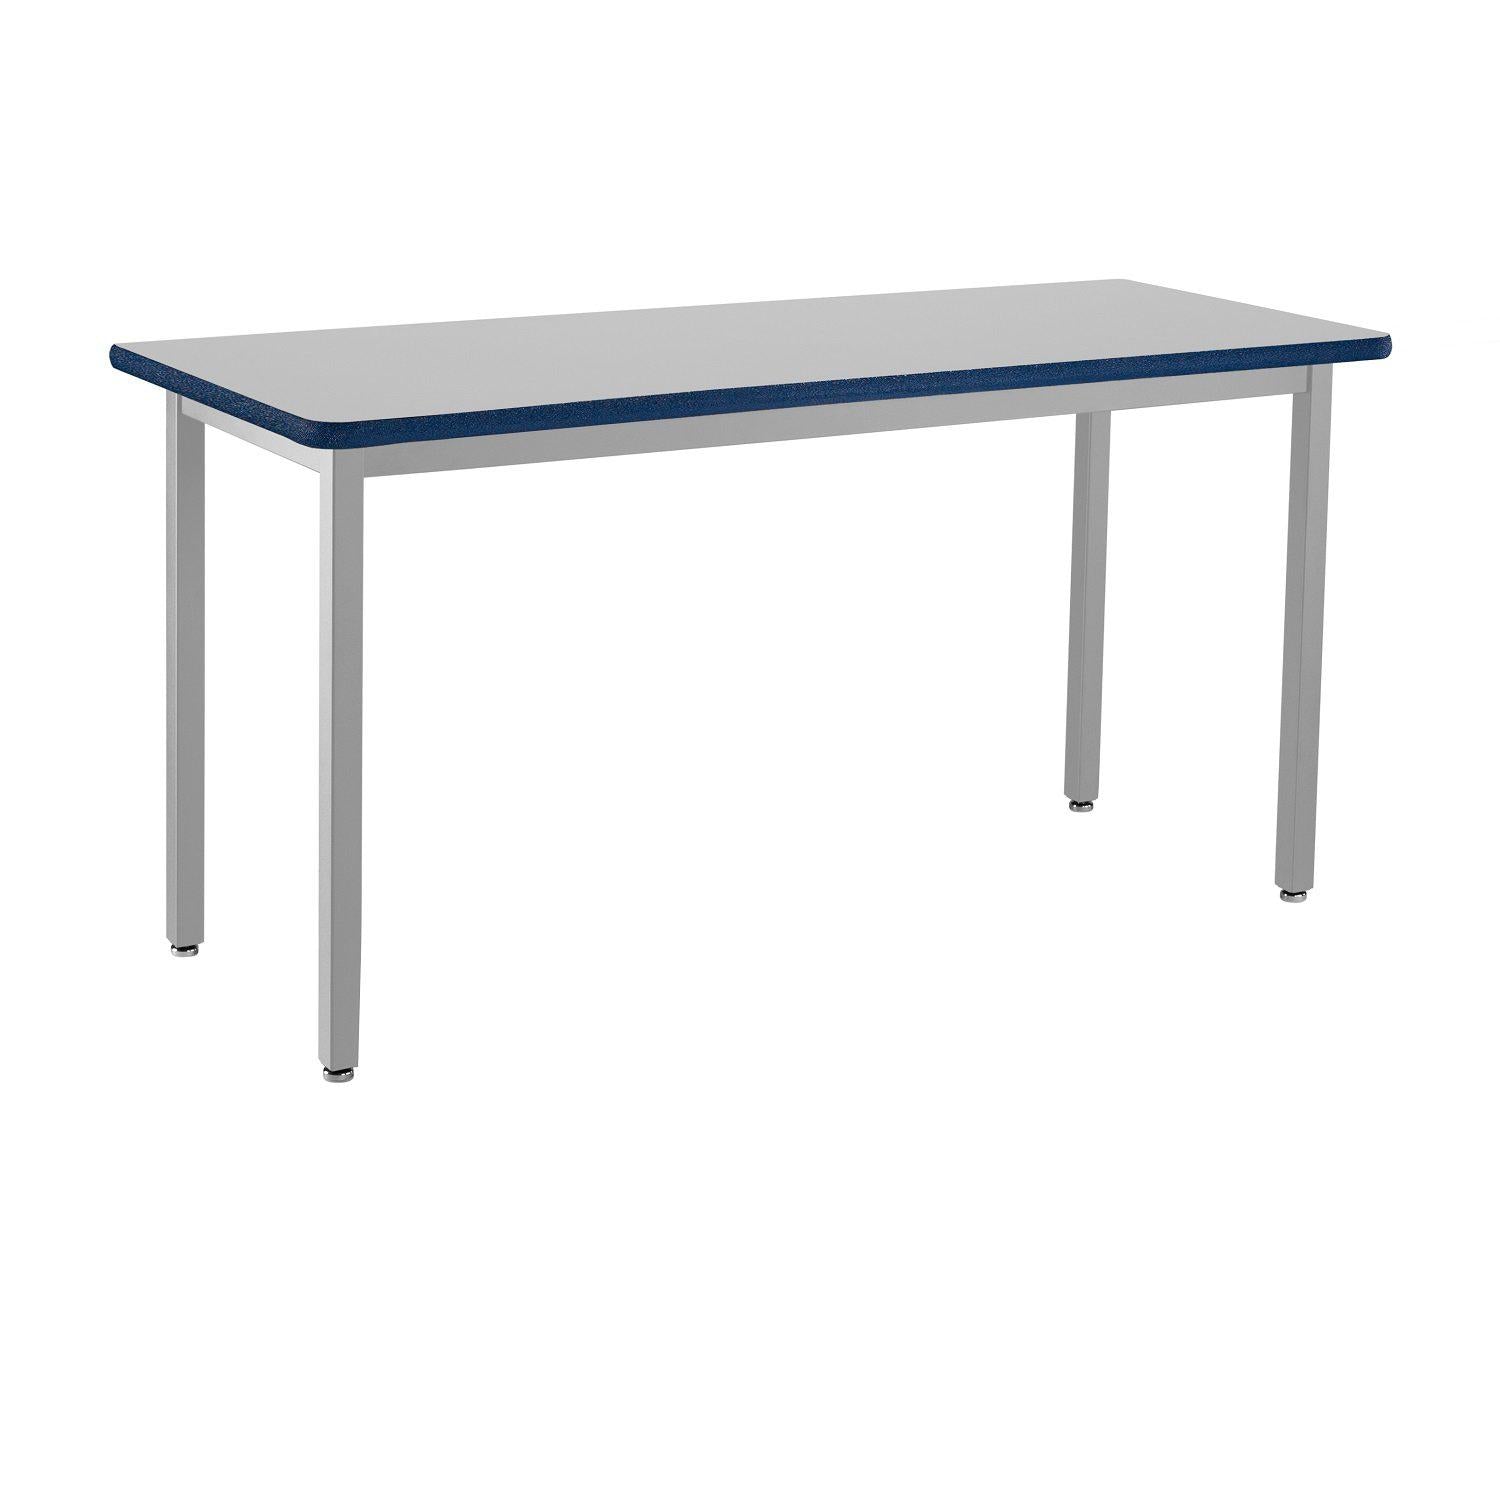 Heavy-Duty Fixed Height Utility Table, Soft Grey Frame, 24" x 42", Supreme High-Pressure Laminate Top with Black ProtectEdge